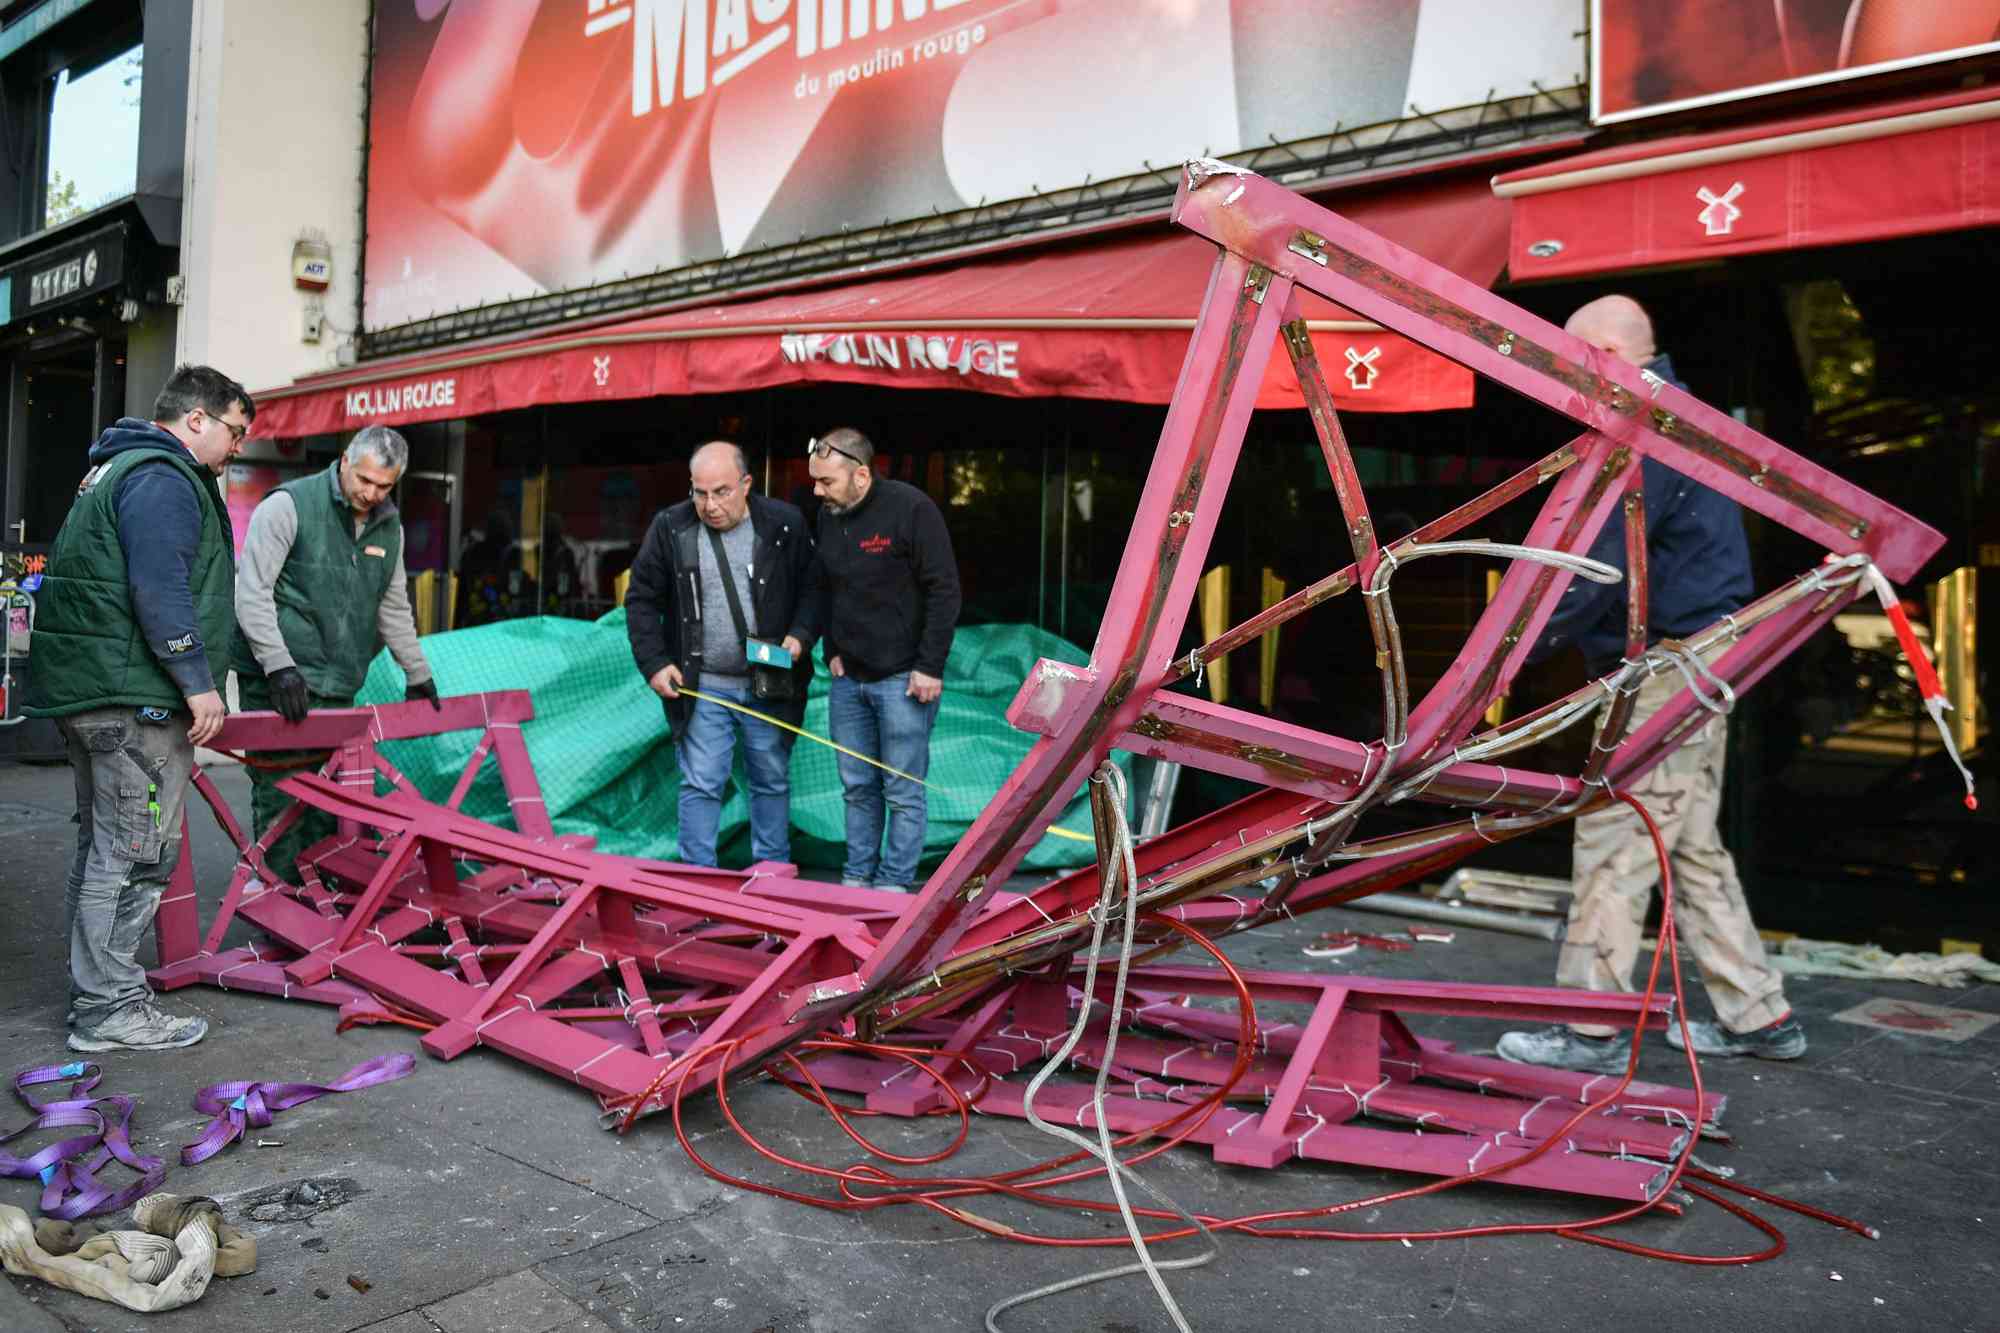 Windmill Sails at the Famous Moulin Rouge in Paris Have Collapsed